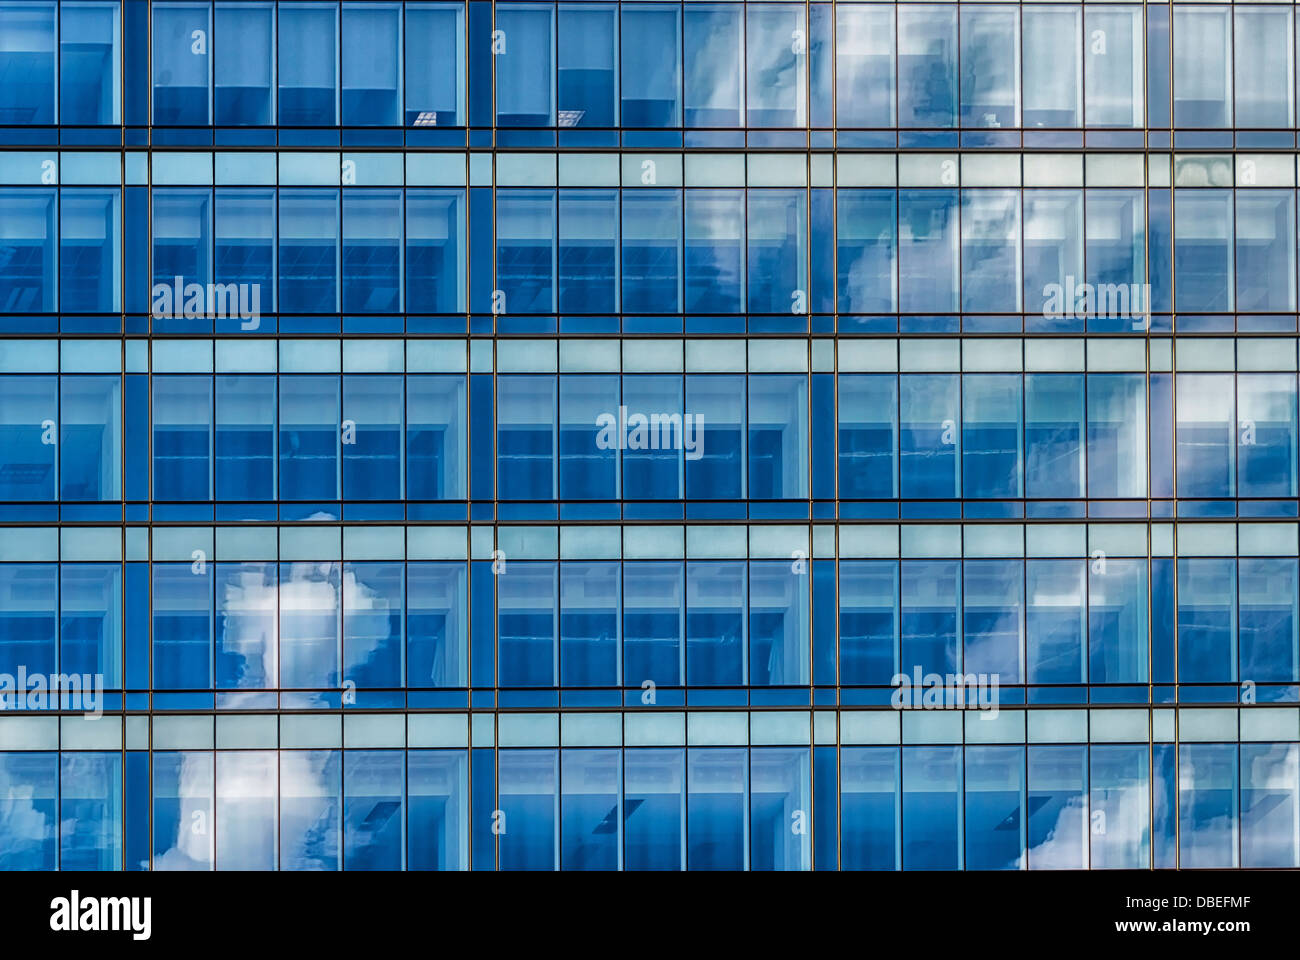 A city abstract image.Clouds reflection in a architectural grid of a modern building Stock Photo